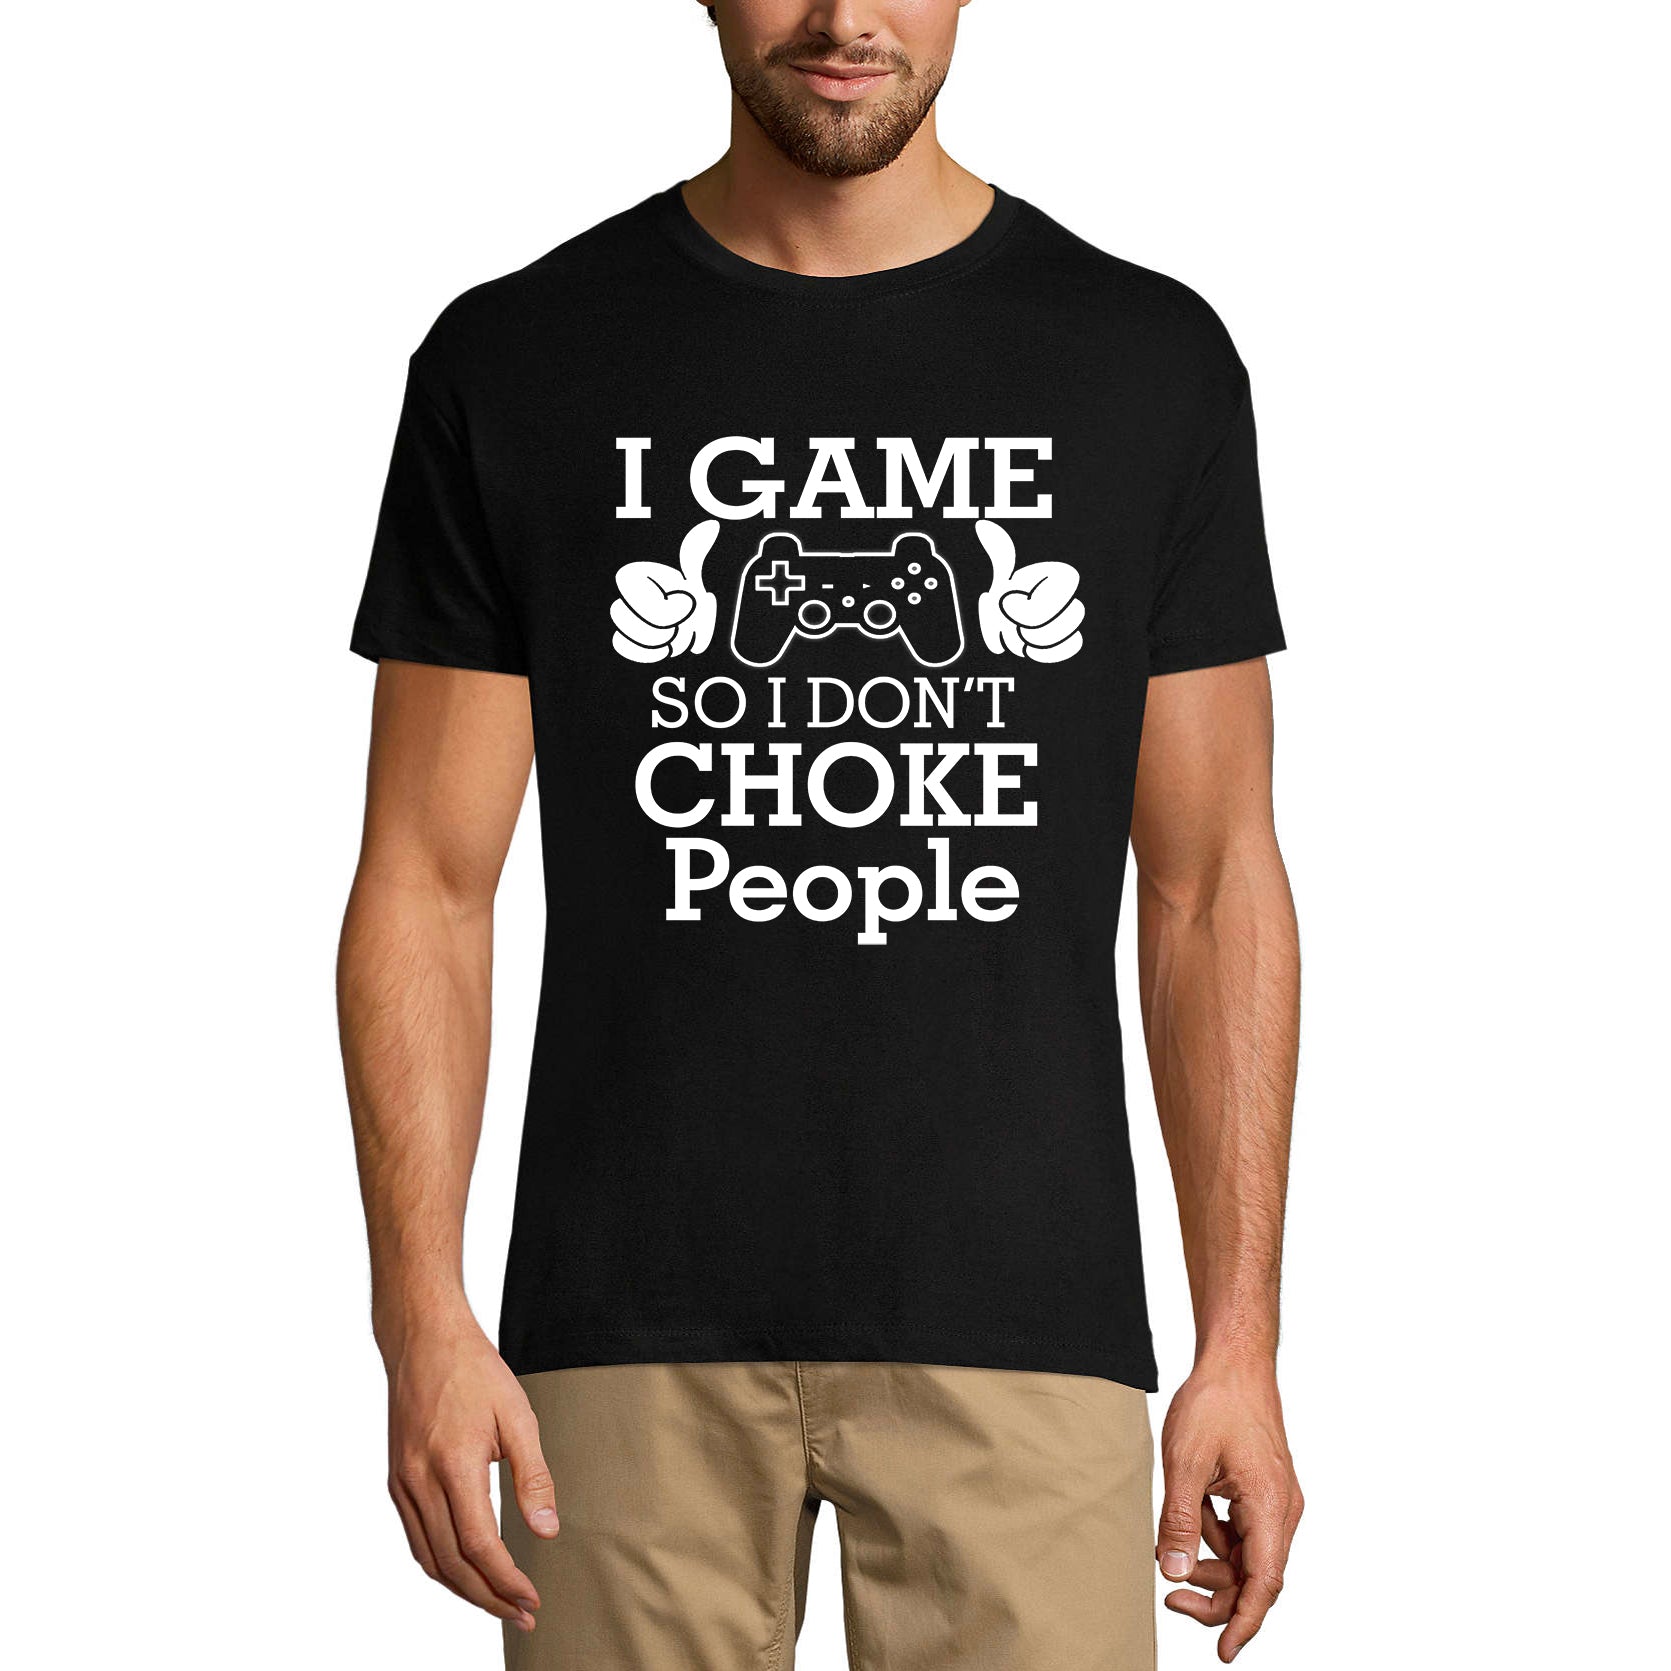 ULTRABASIC Men's T-Shirt I Game So I Don't Choke People - Funny Graphic Apparel humor joke dad gamer i paused my game alien player ufo playstation tee shirt clothes gaming apparel gifts super mario nintendo call of duty graphic tshirt video game funny geek gift for the gamer fortnite pubg humor son father birthday